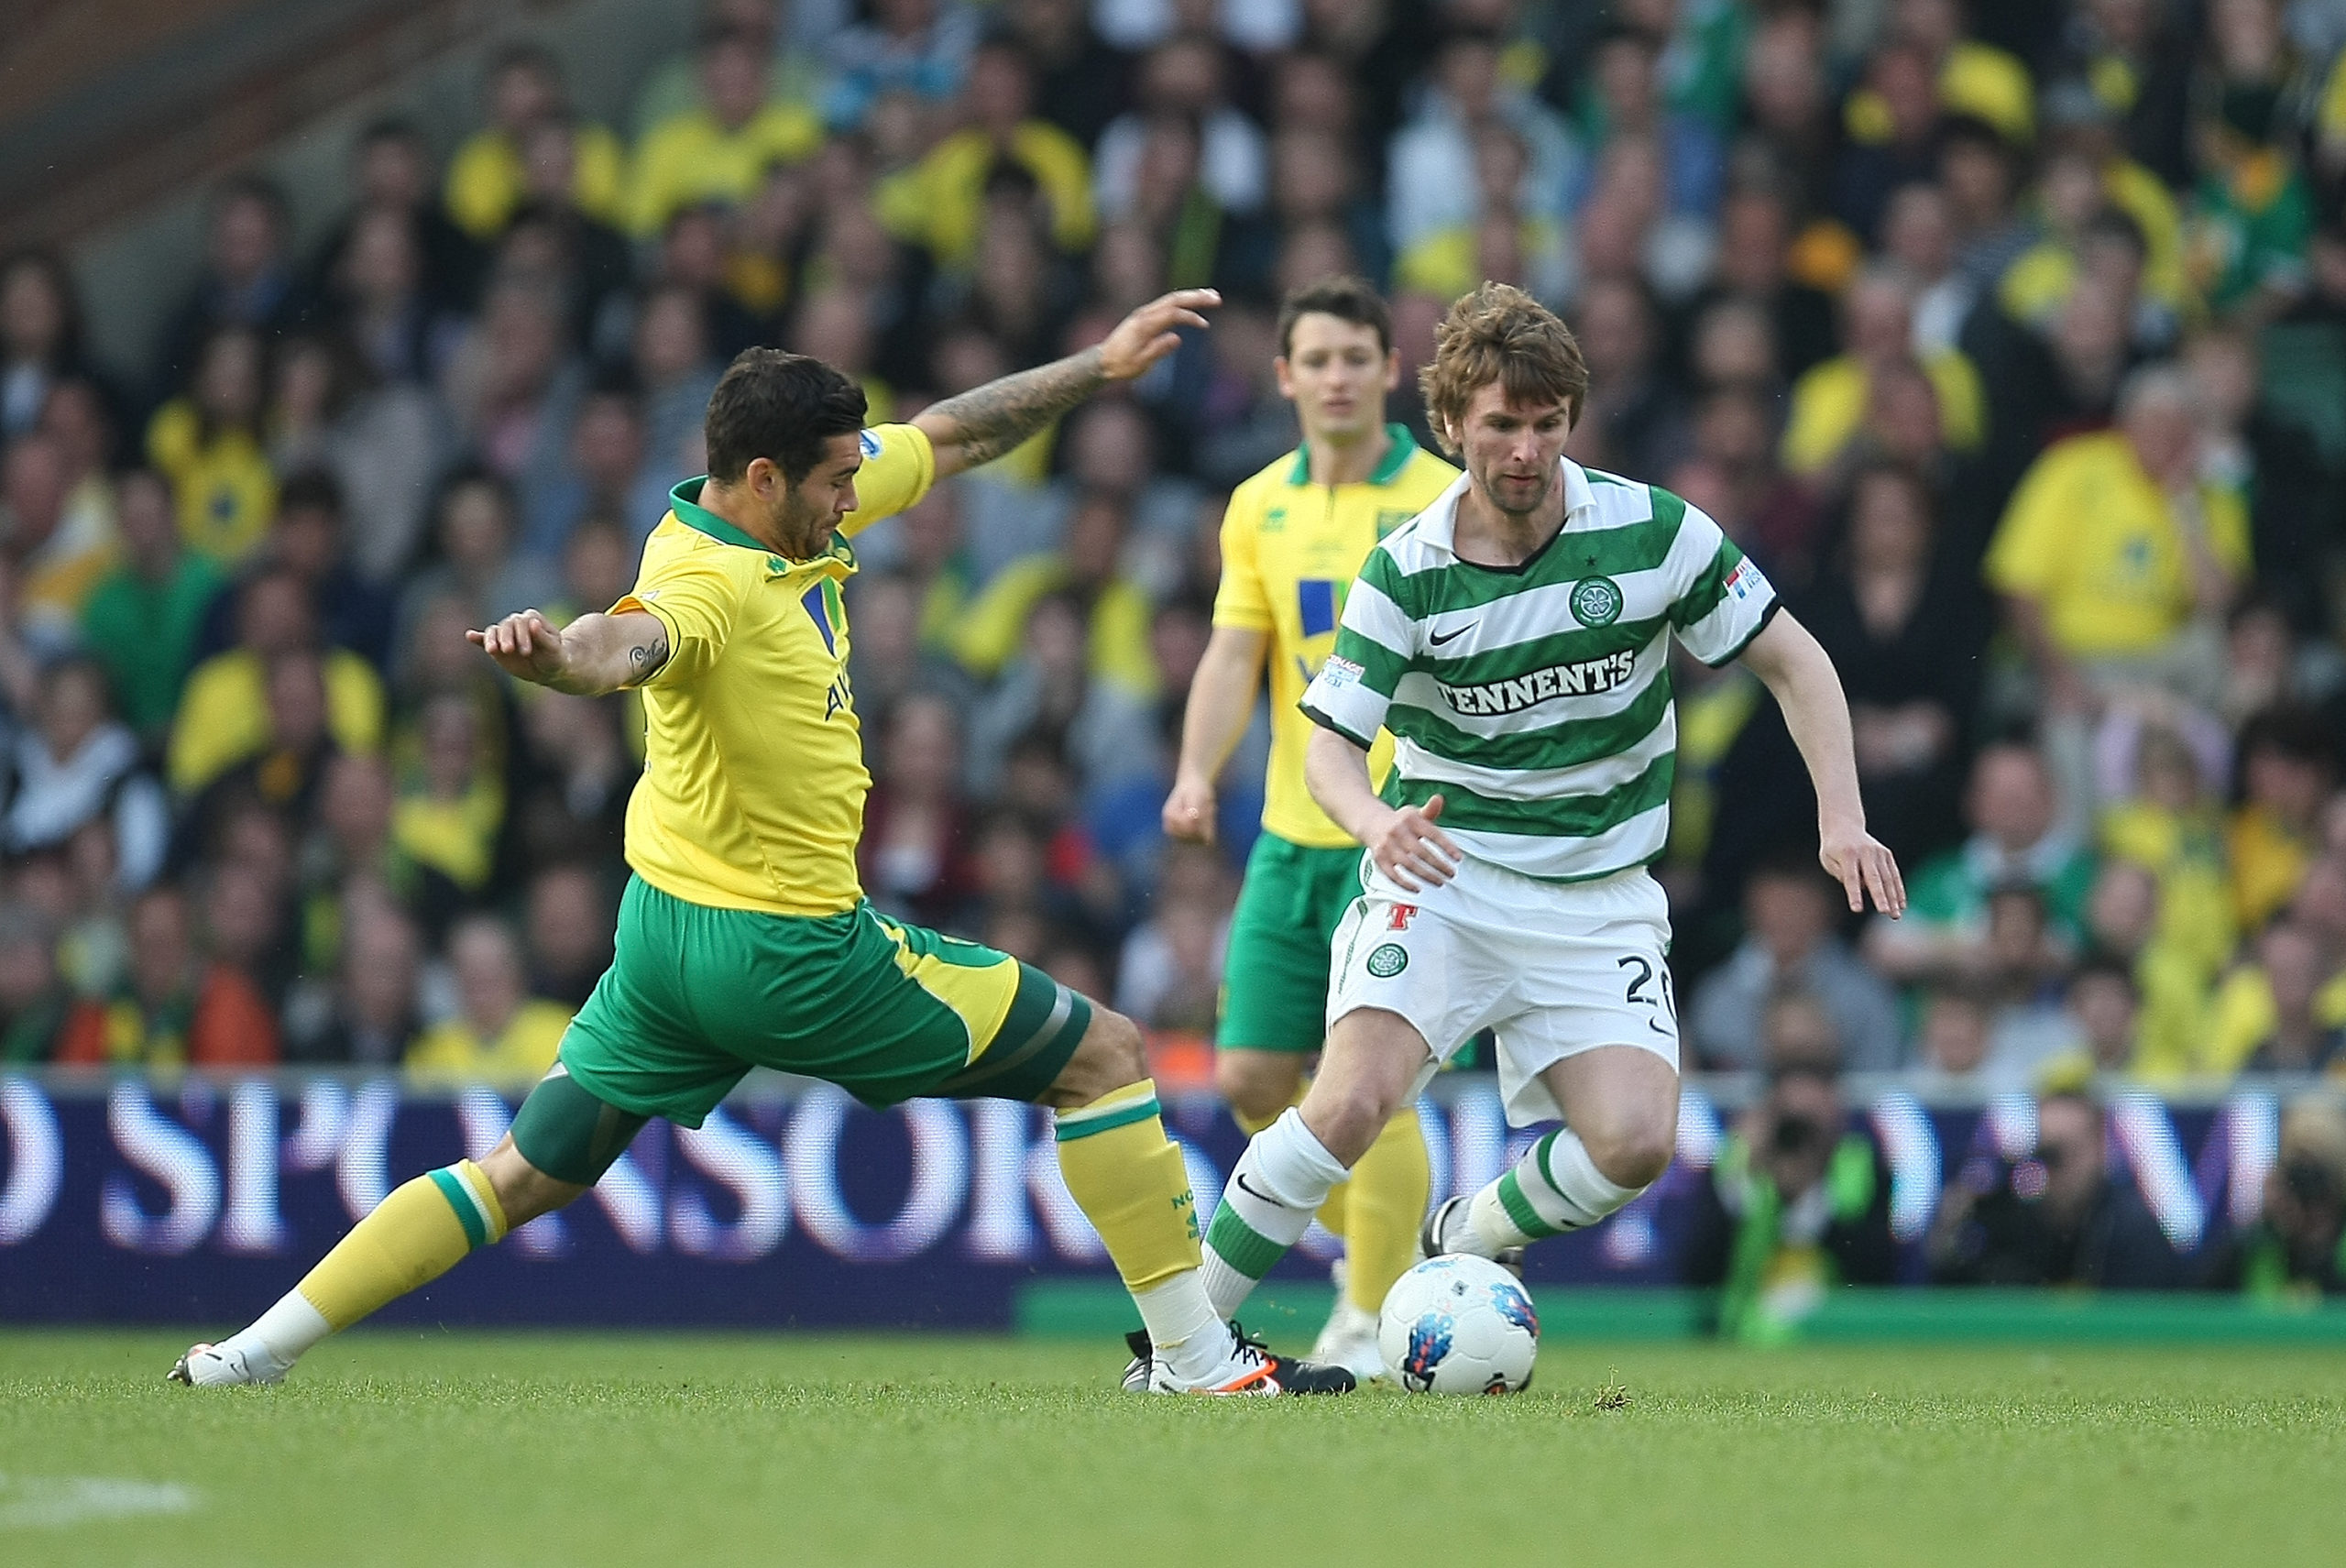 'He was pivotal'; Neil Lennon reveals how Paddy McCourt helped seal Shane Duffy Celtic move